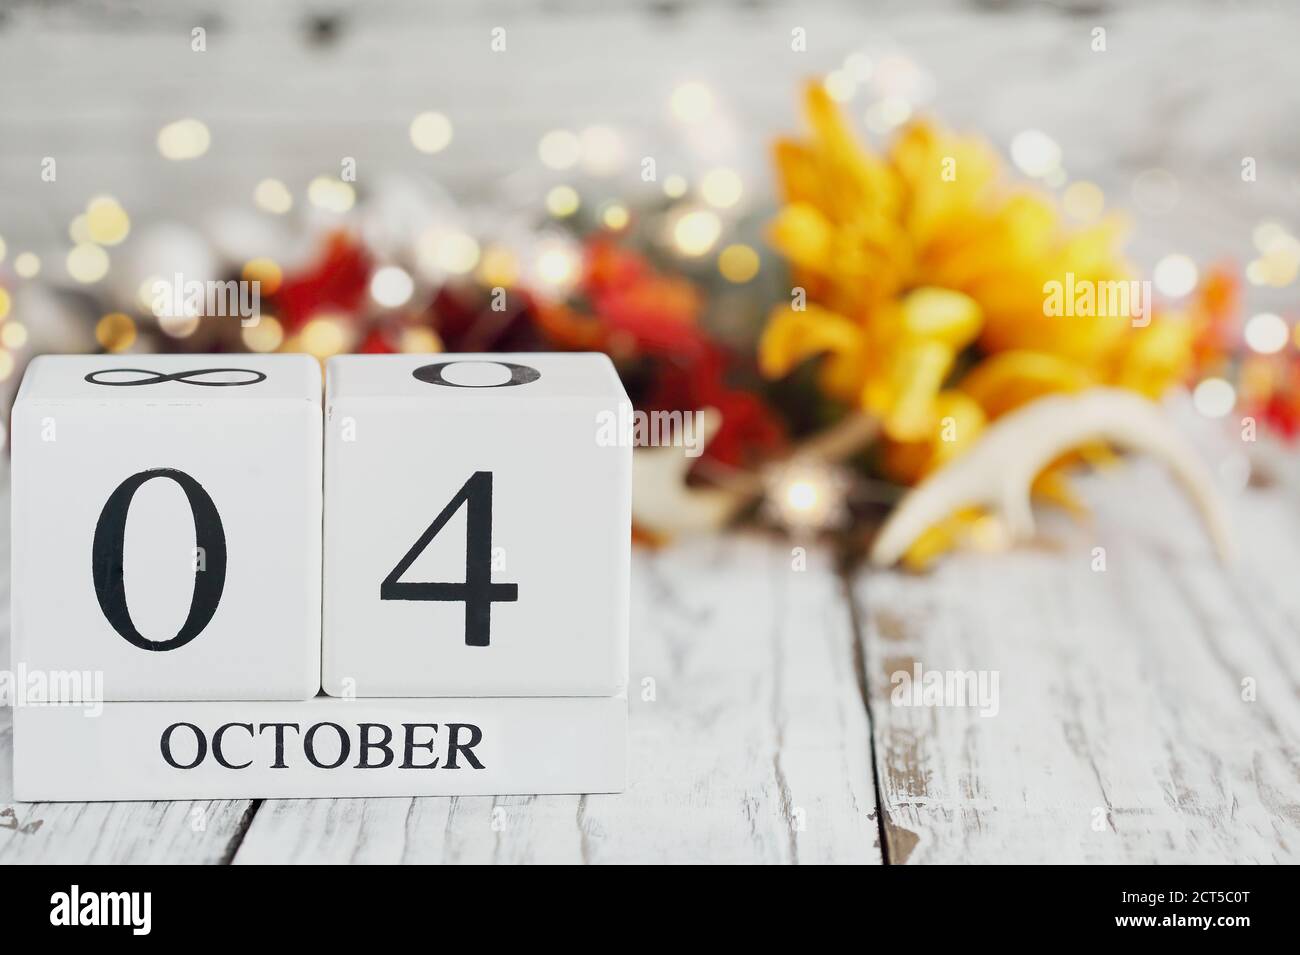 White wood calendar blocks with the date October 4th and autumn decorations over a wooden table. Selective focus with blurred background. Stock Photo